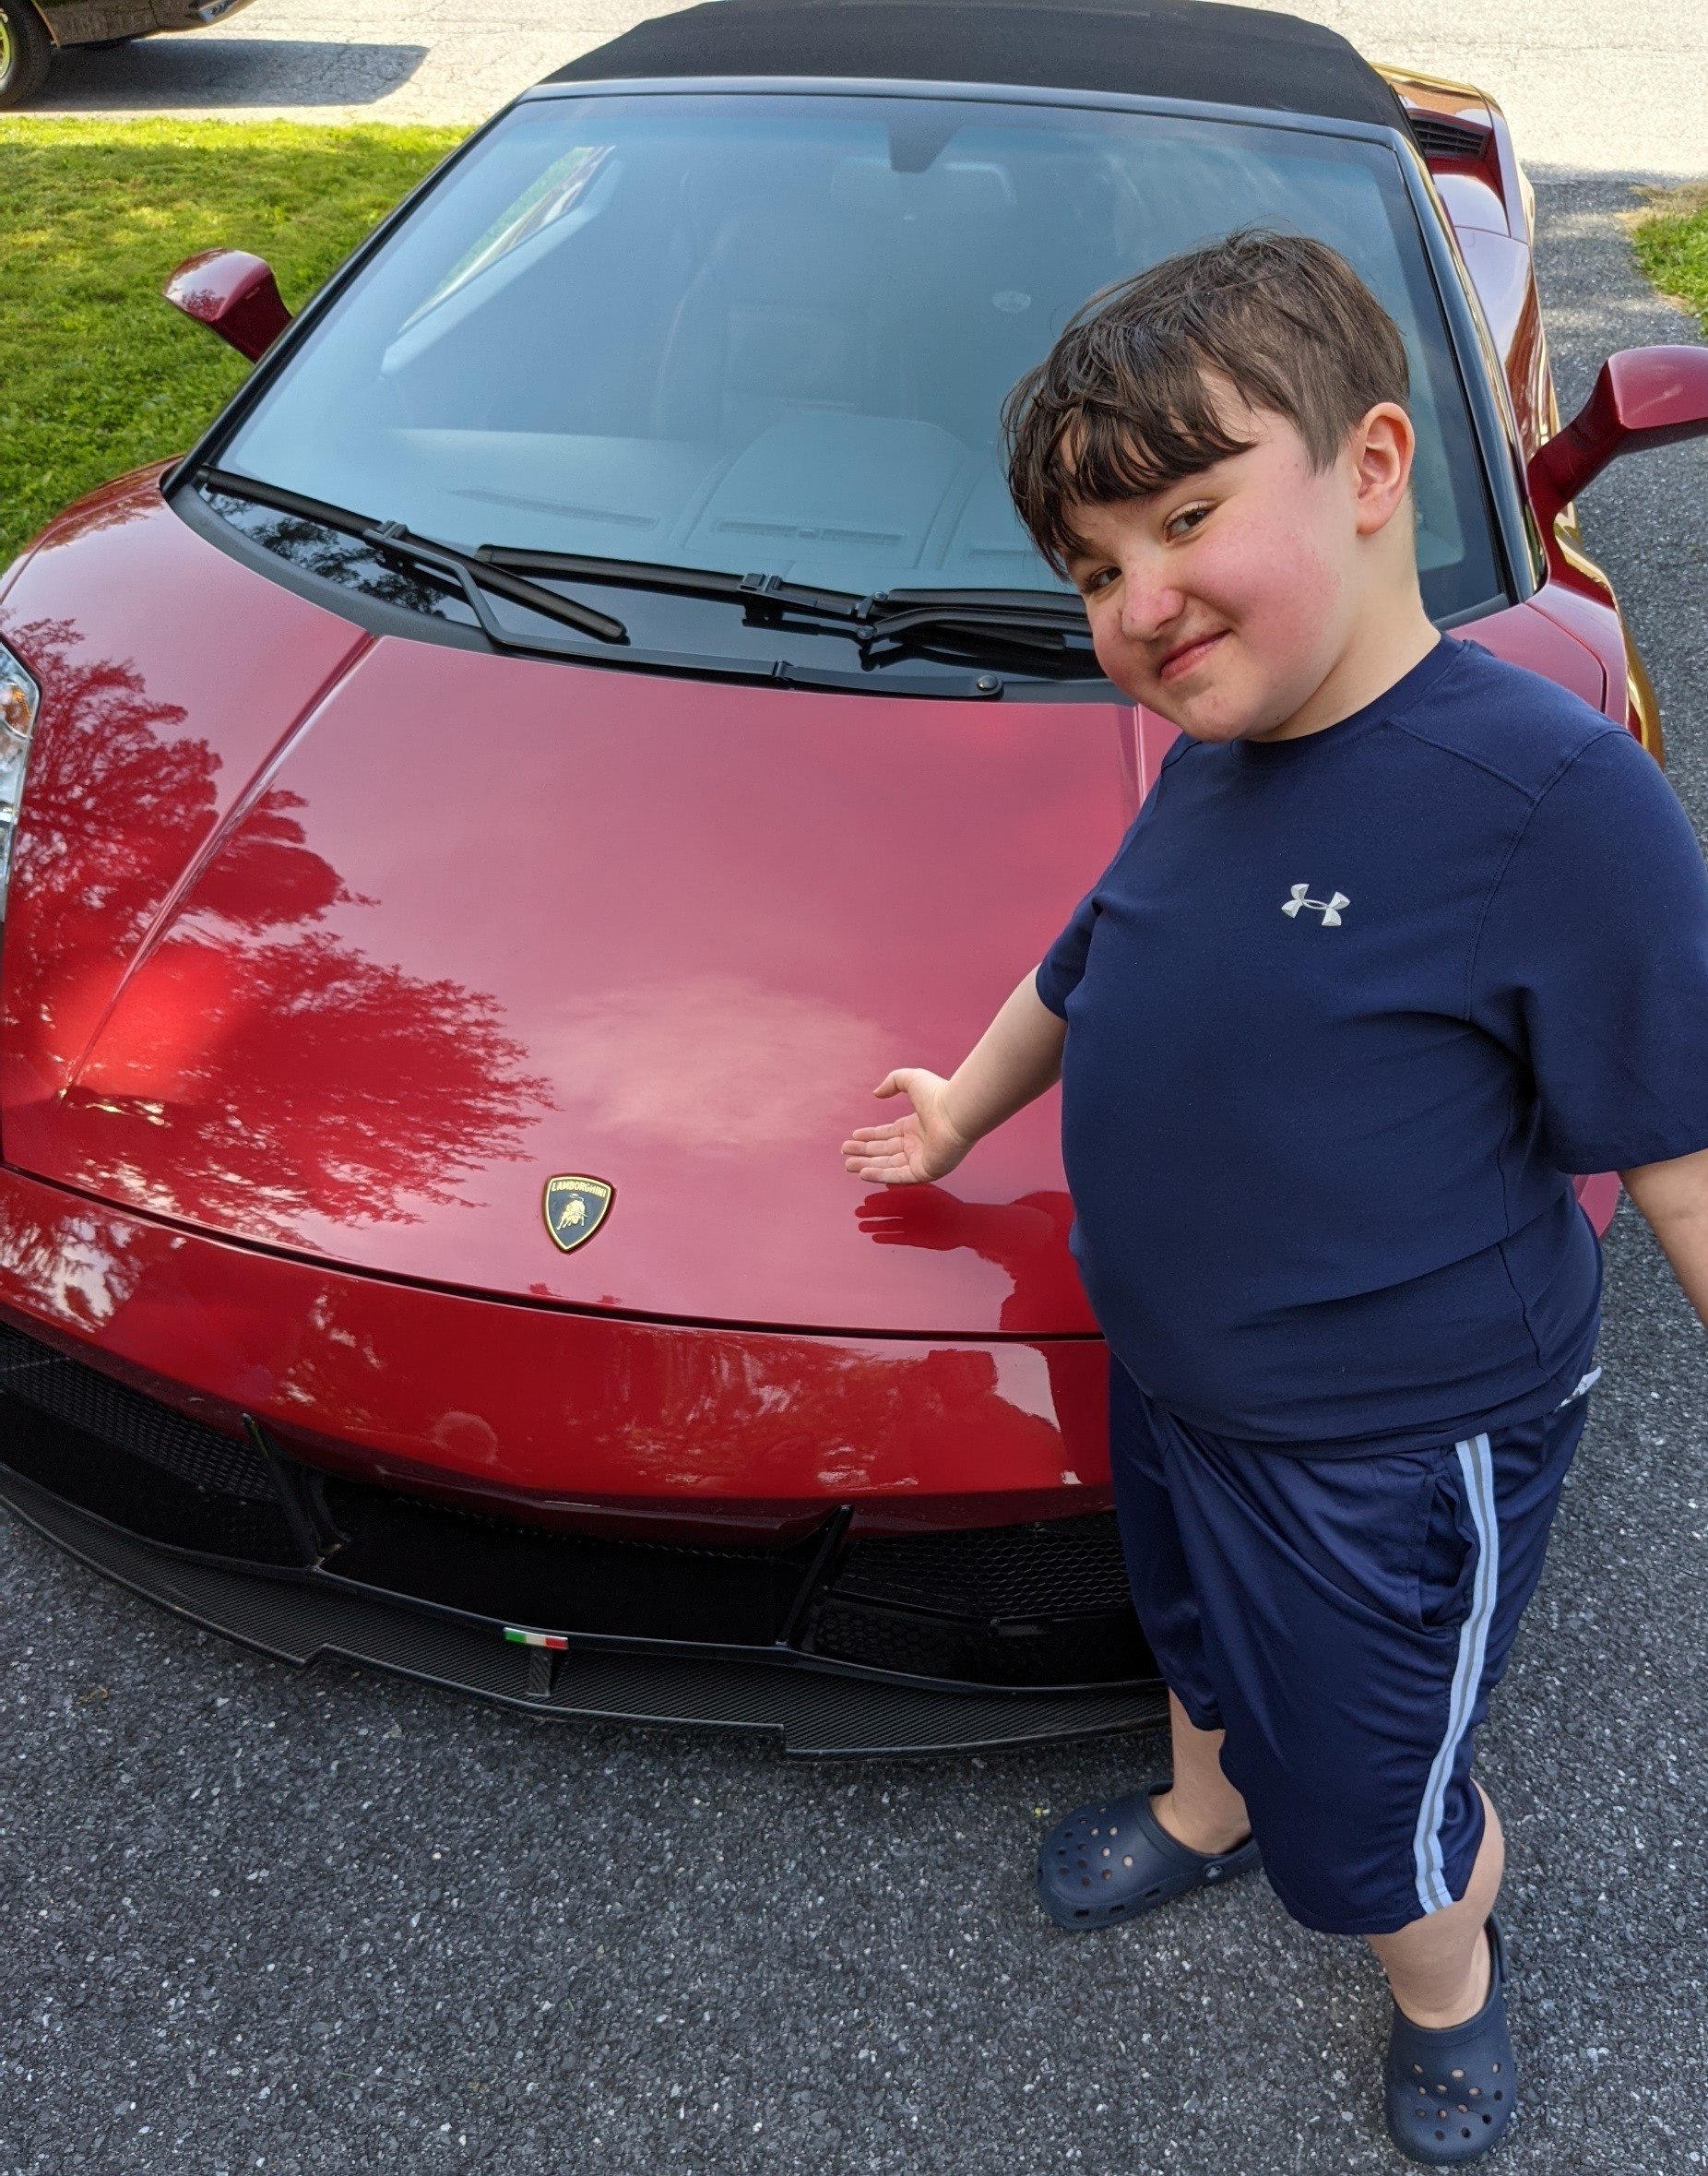 Drew flexing with his dream car!